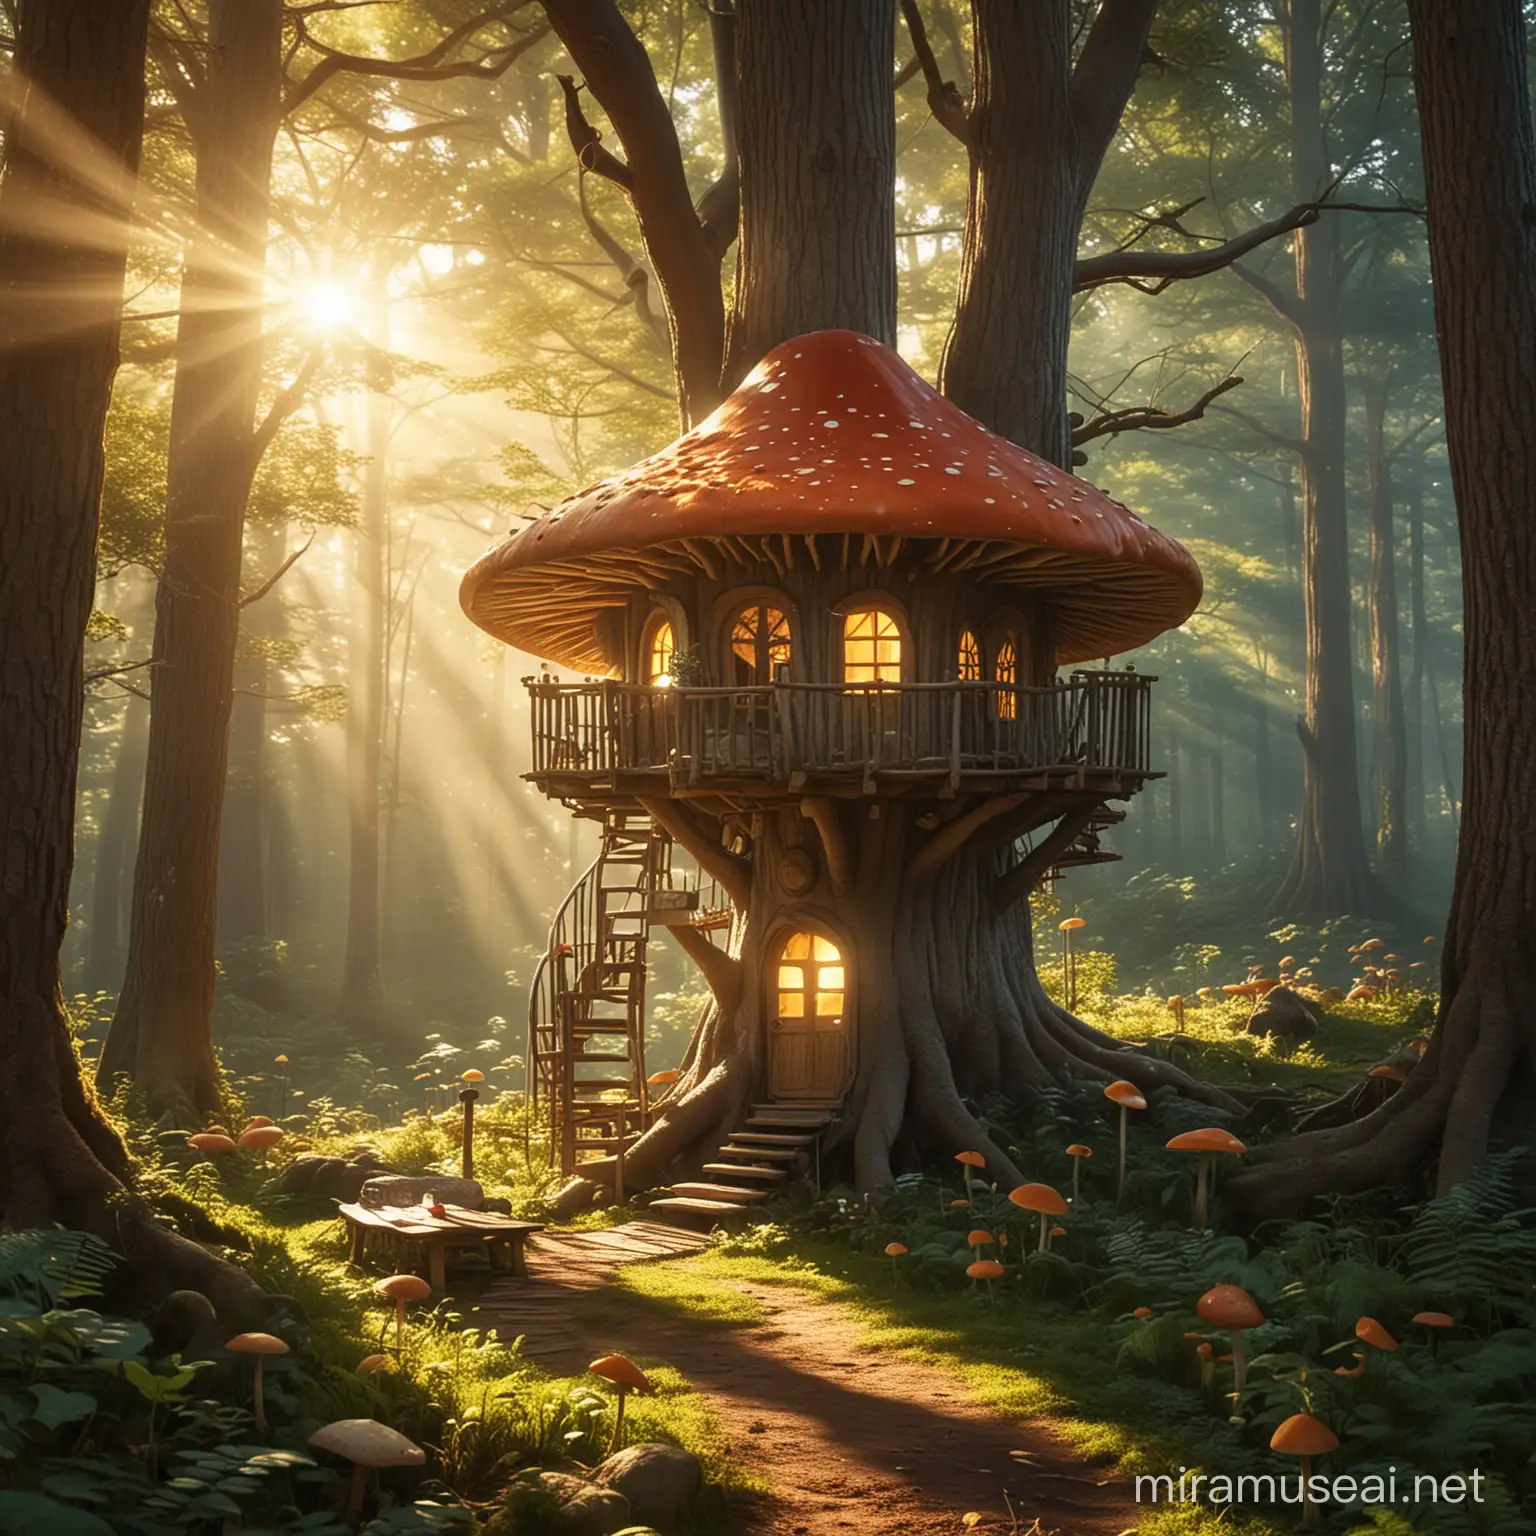 Enchanted Forest Treehouse with Whimsical Mushrooms and Dappled Sunlight